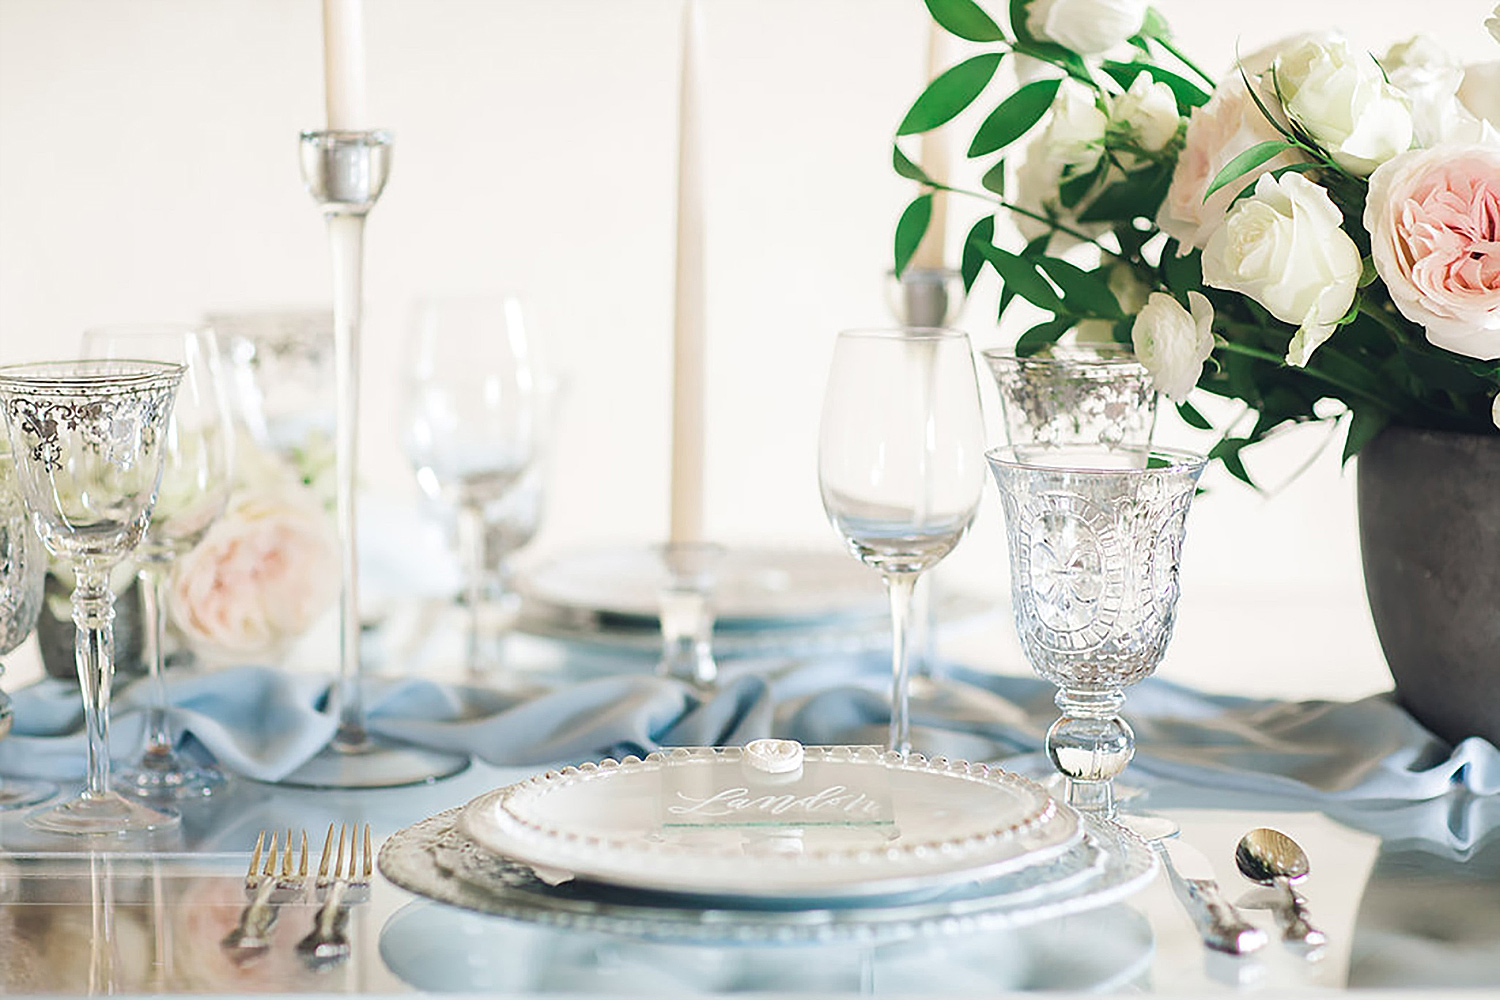 Light blue place setting with a vintage blue charger